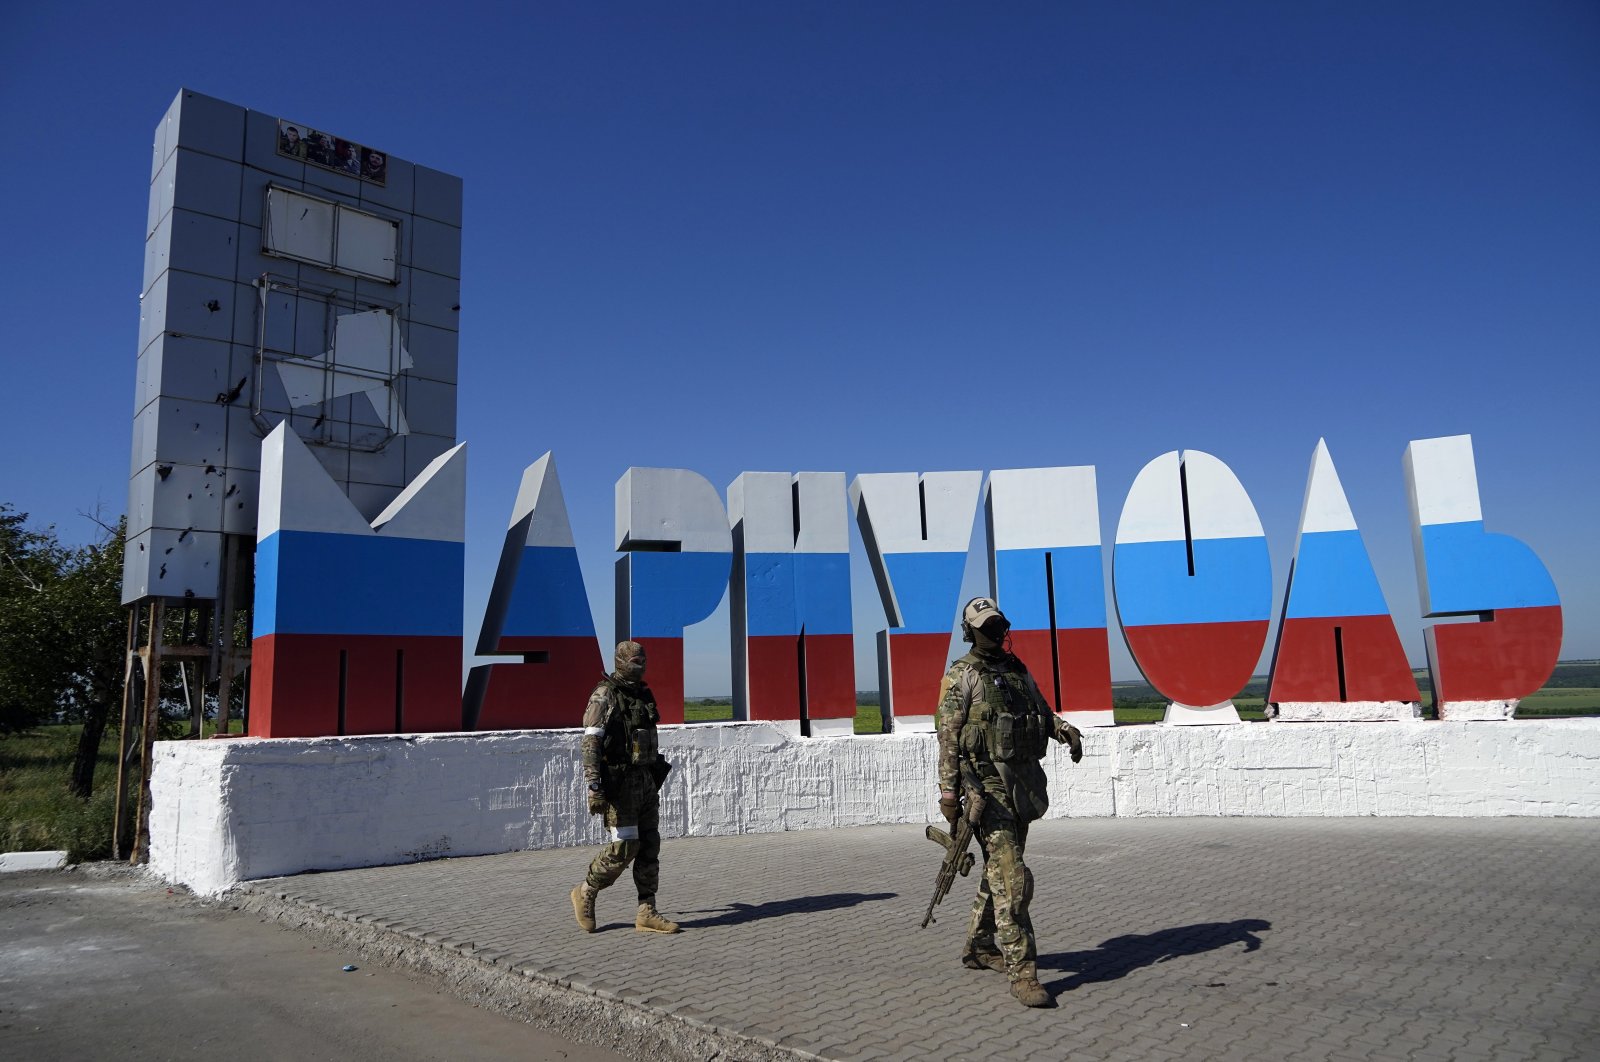 Russian soldiers walk past a repainted city name in the colors of the Russian flag at the entrance of Mariupol, on the territory which is under the Government of the Donetsk People&#039;s Republic control, eastern Ukraine, June 12, 2022. (AP Photo)